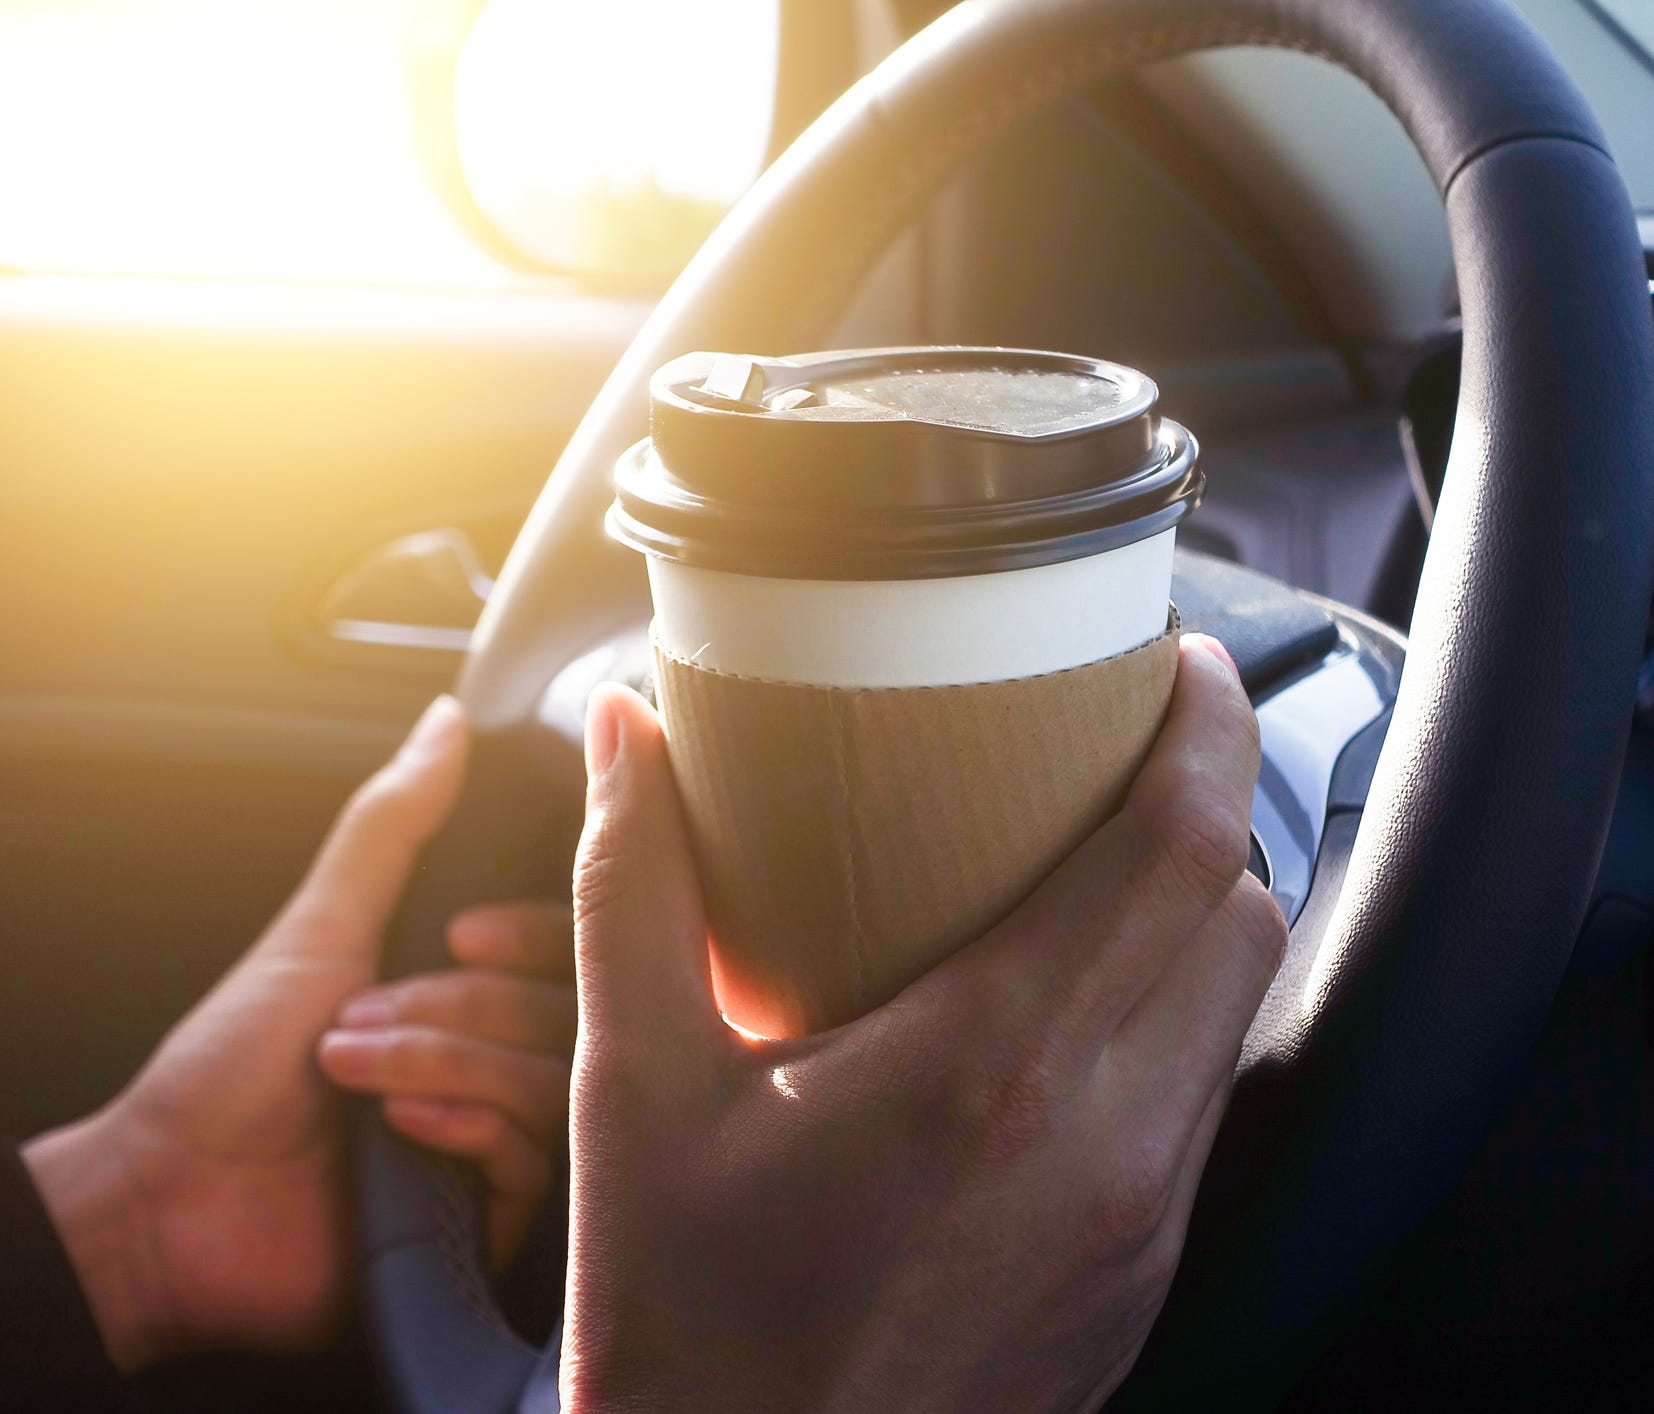 Gas stations have upgraded coffee service with a wide variety of flavors and creamers. In many cases you can even get a fancy latte or custom coffee drink.